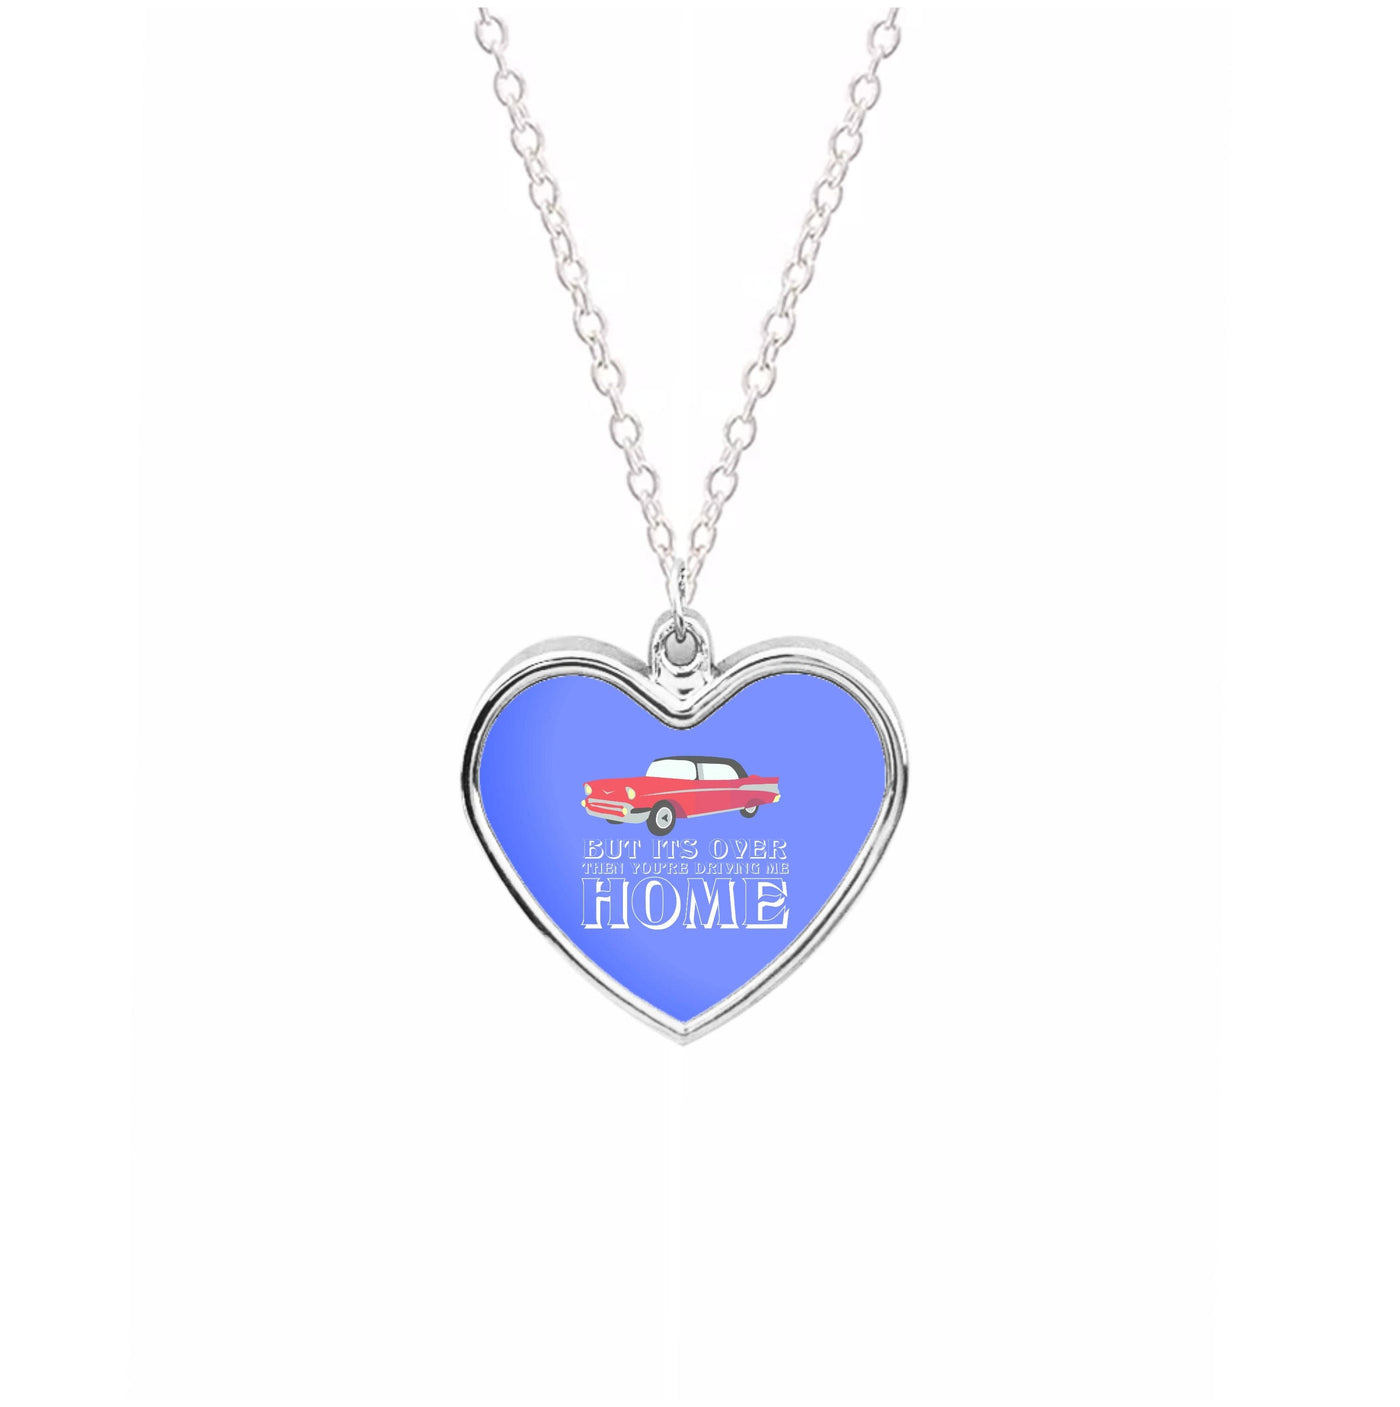 But Its Over Then Your Driving Home - TikTok Trends Necklace